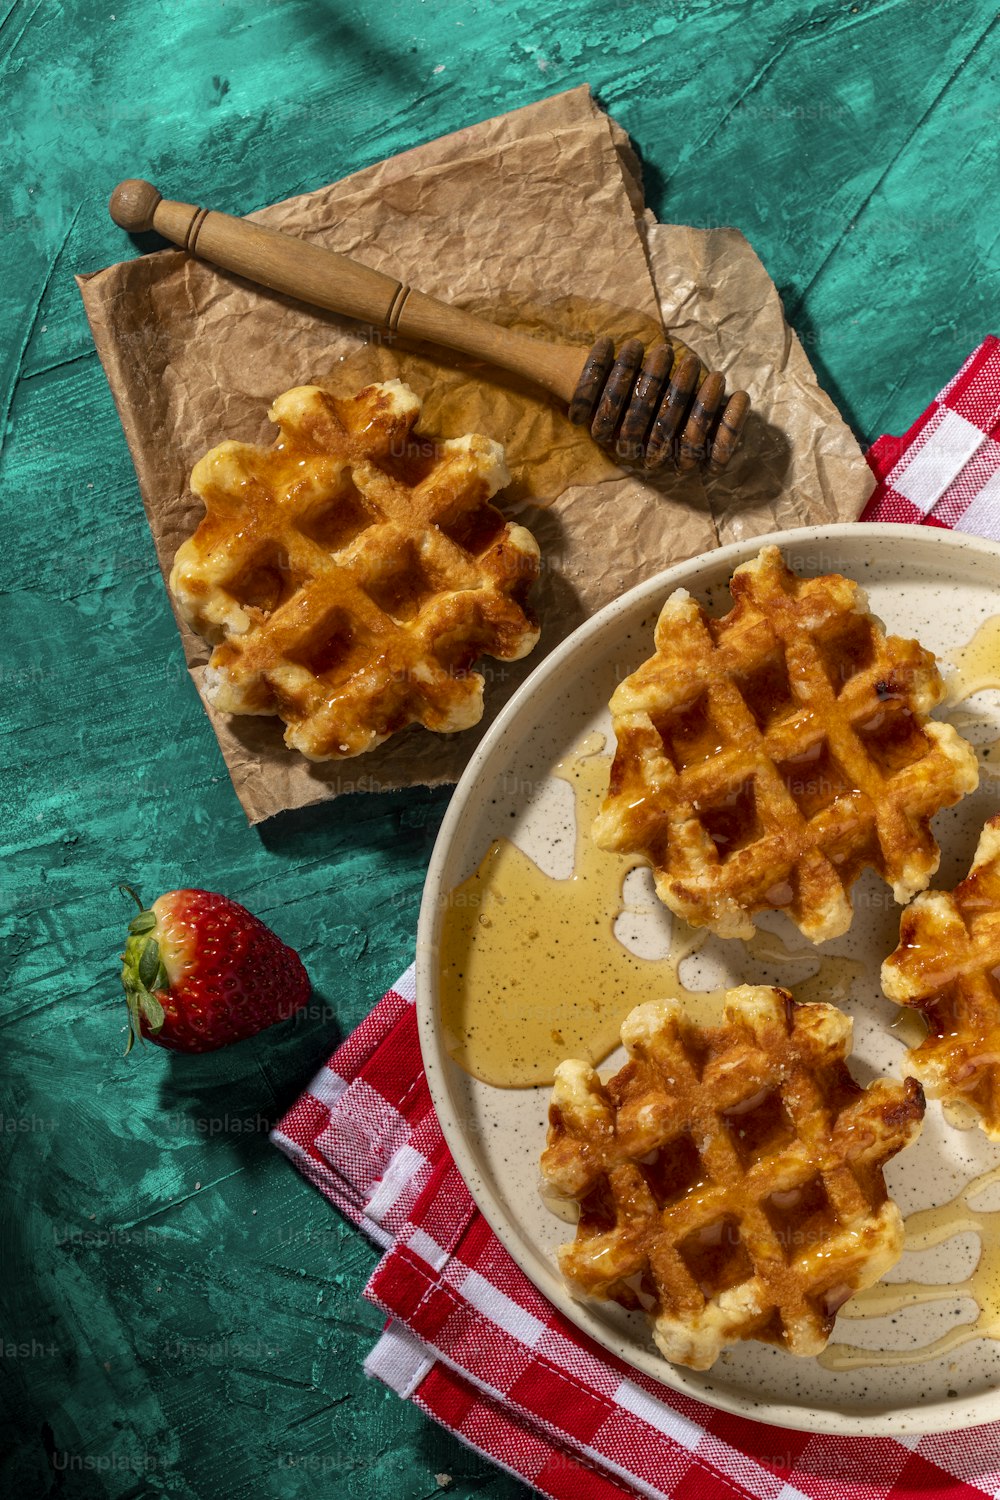 a plate of waffles on a red and white checkered table cloth